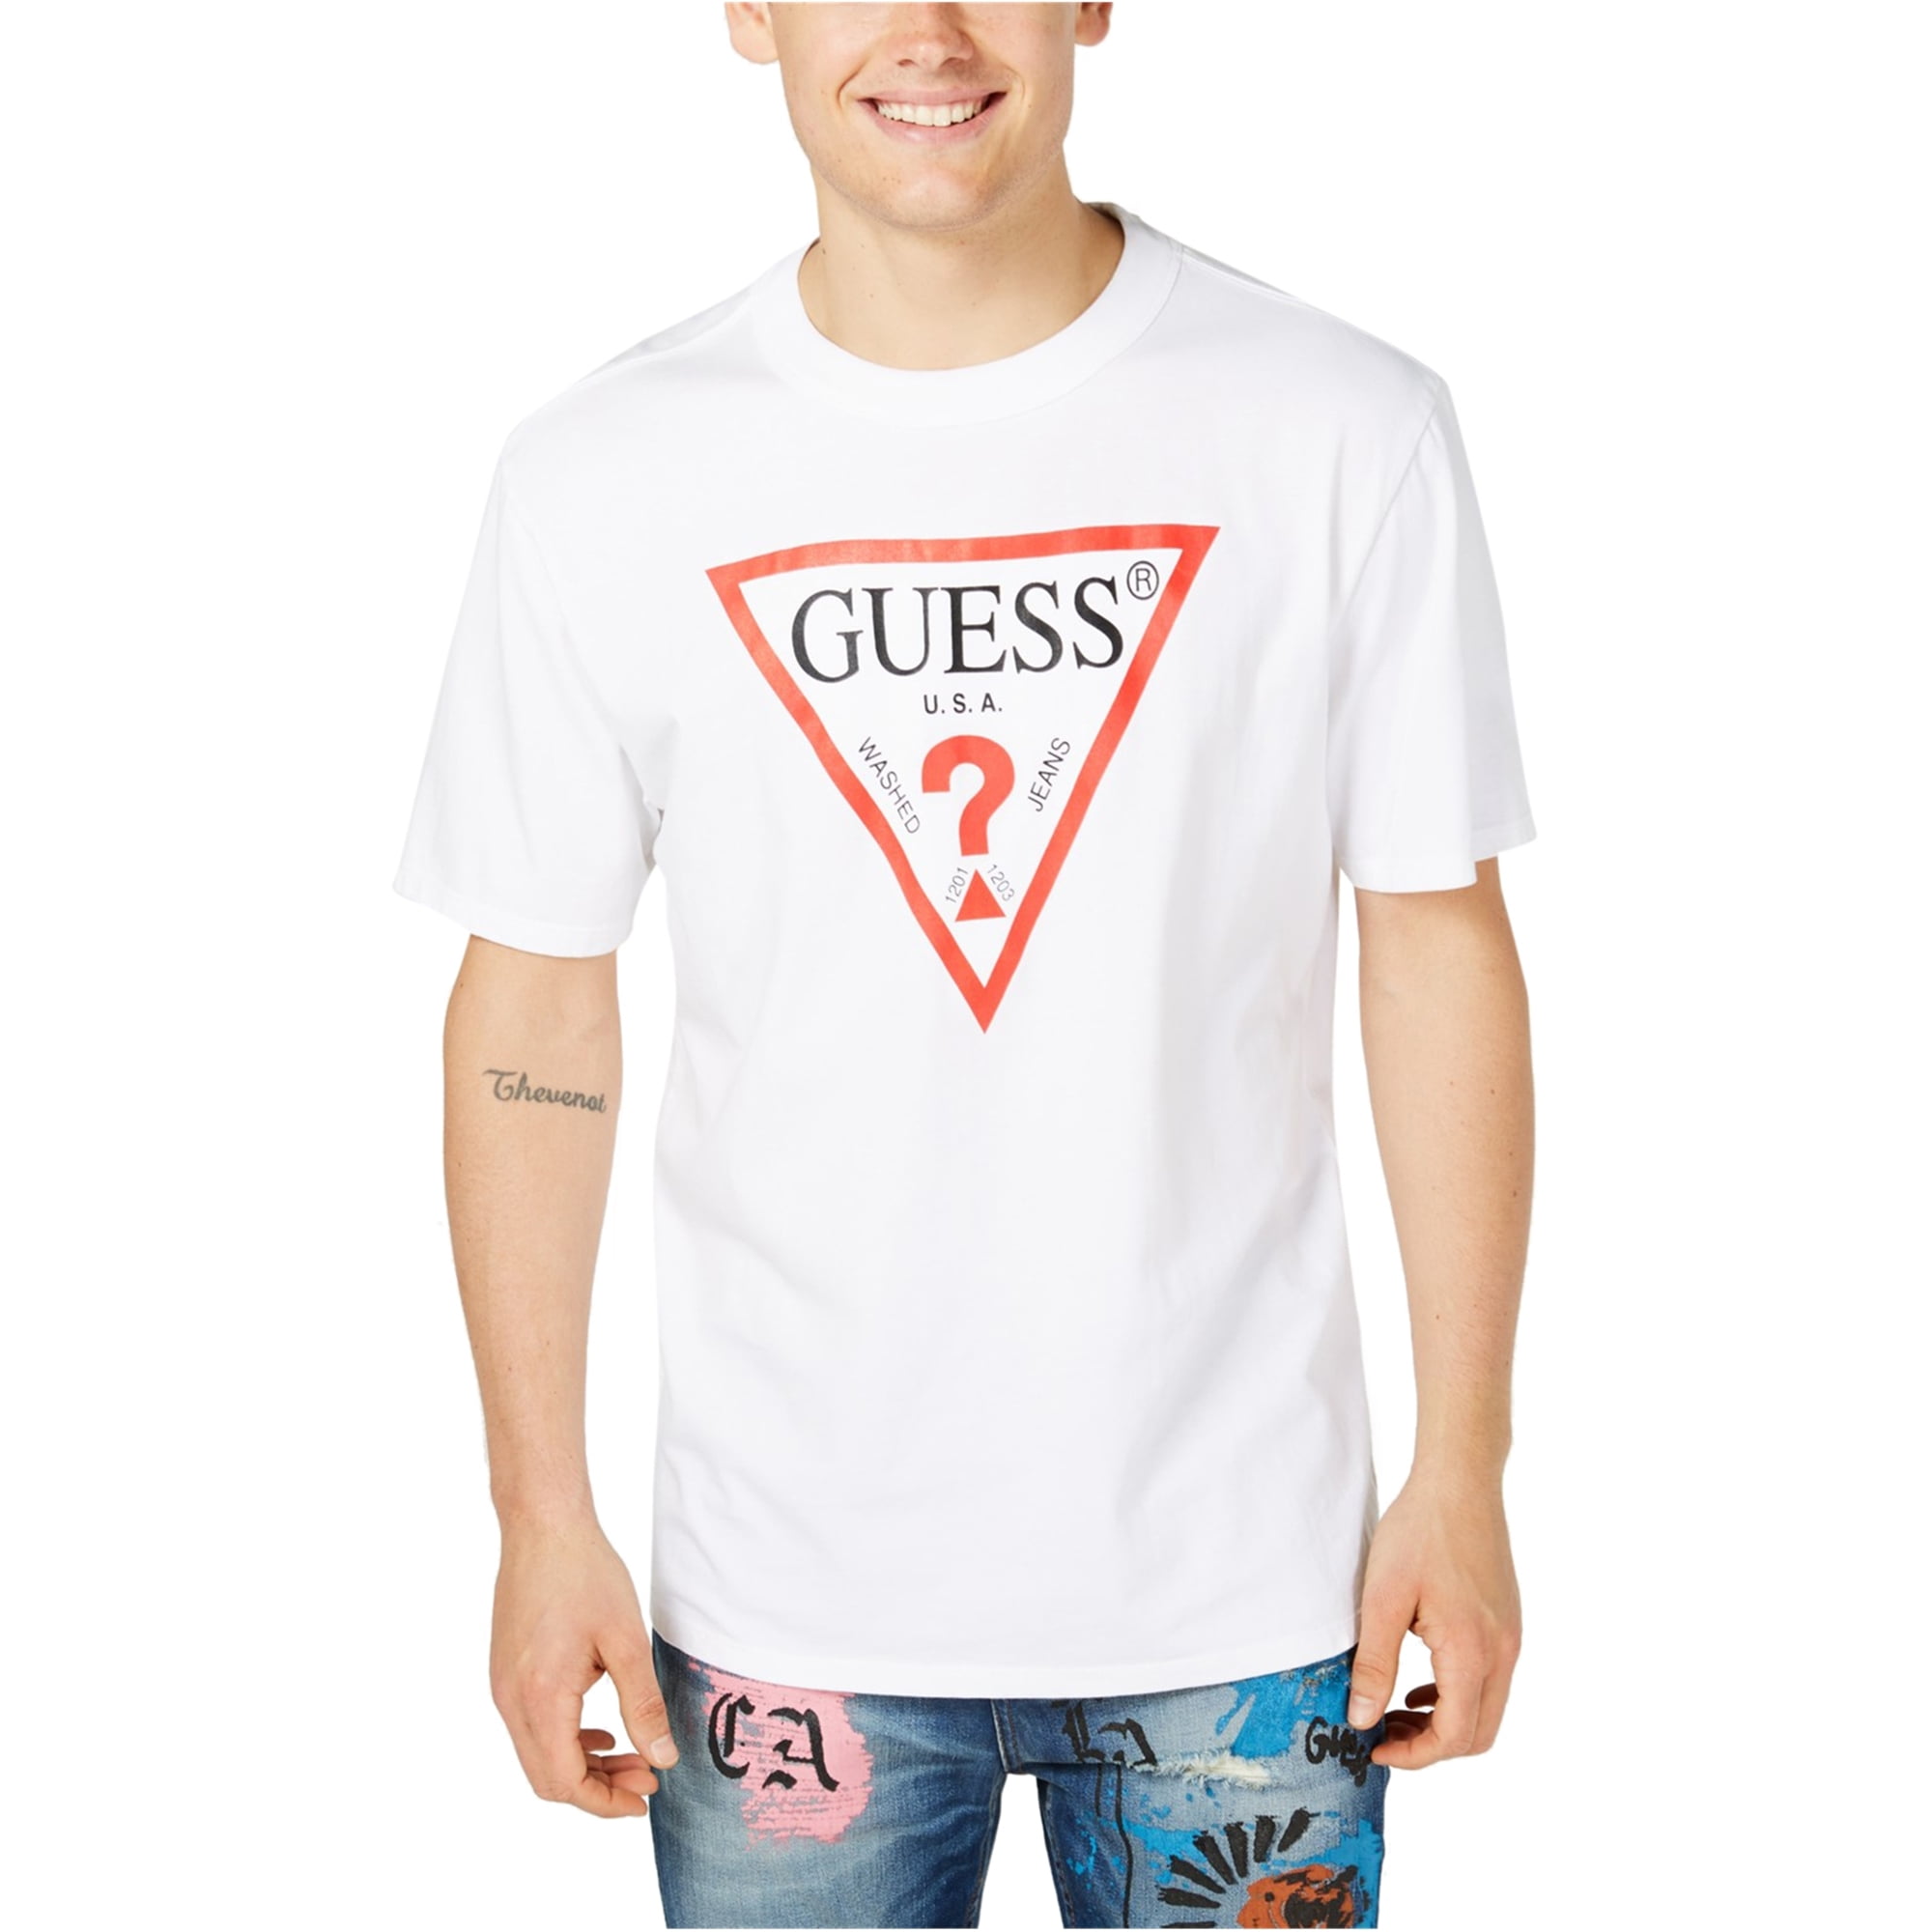 GUESS - GUESS Mens Triangle Logo Graphic T-Shirt, White, Large ...